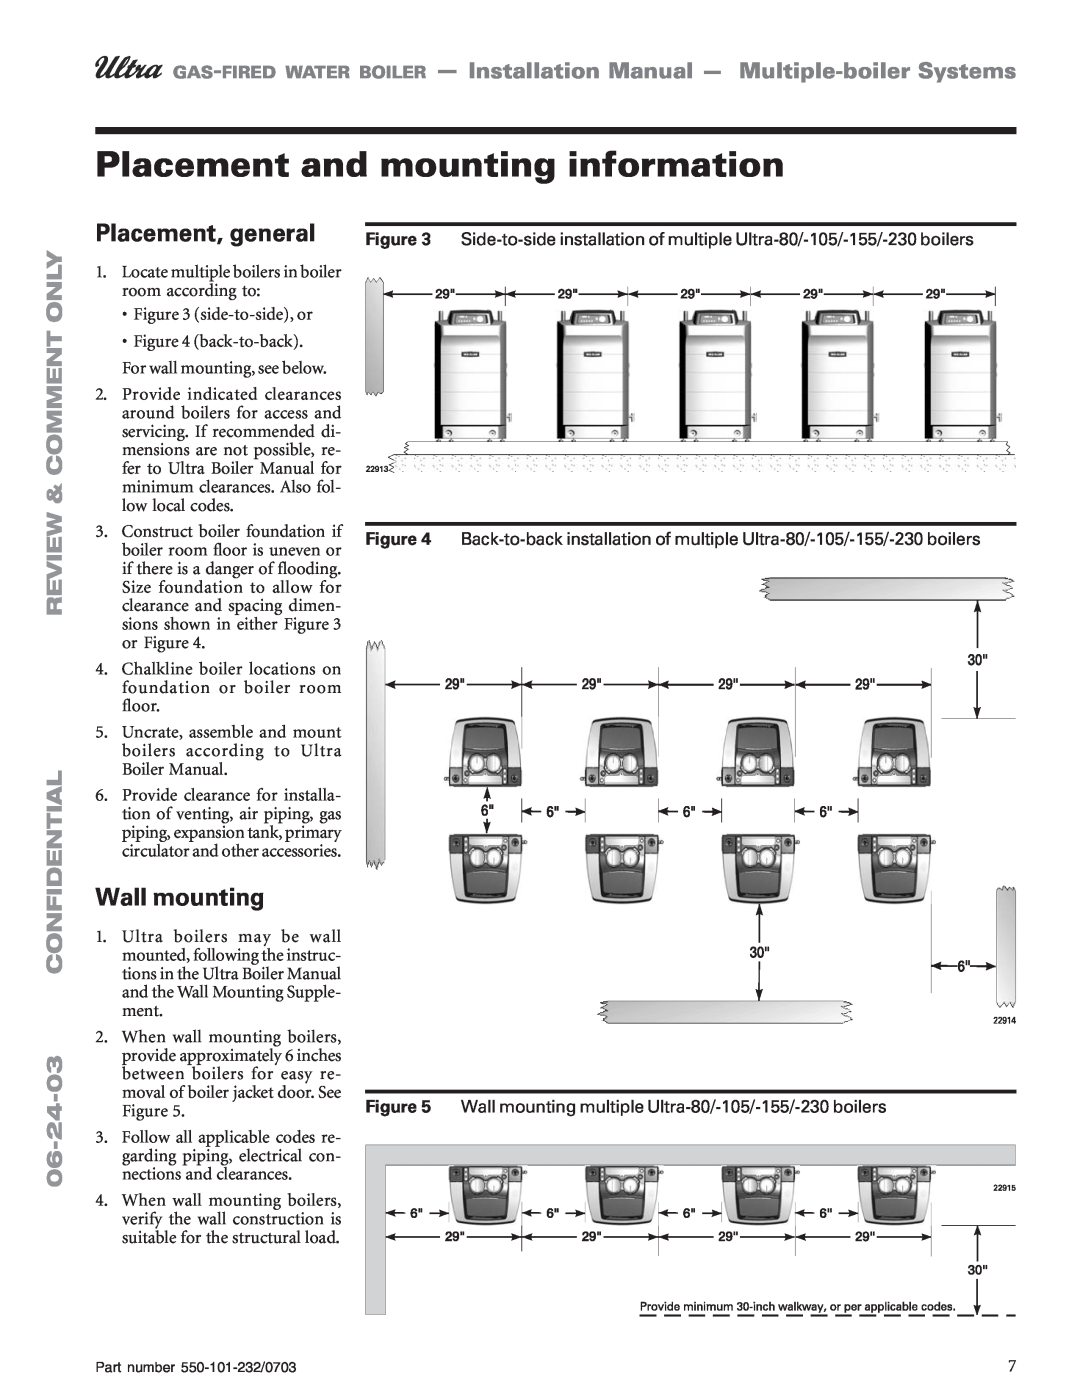 Weil-McLain Boiler installation manual Placement and mounting information, Placement, general, Wall mounting 